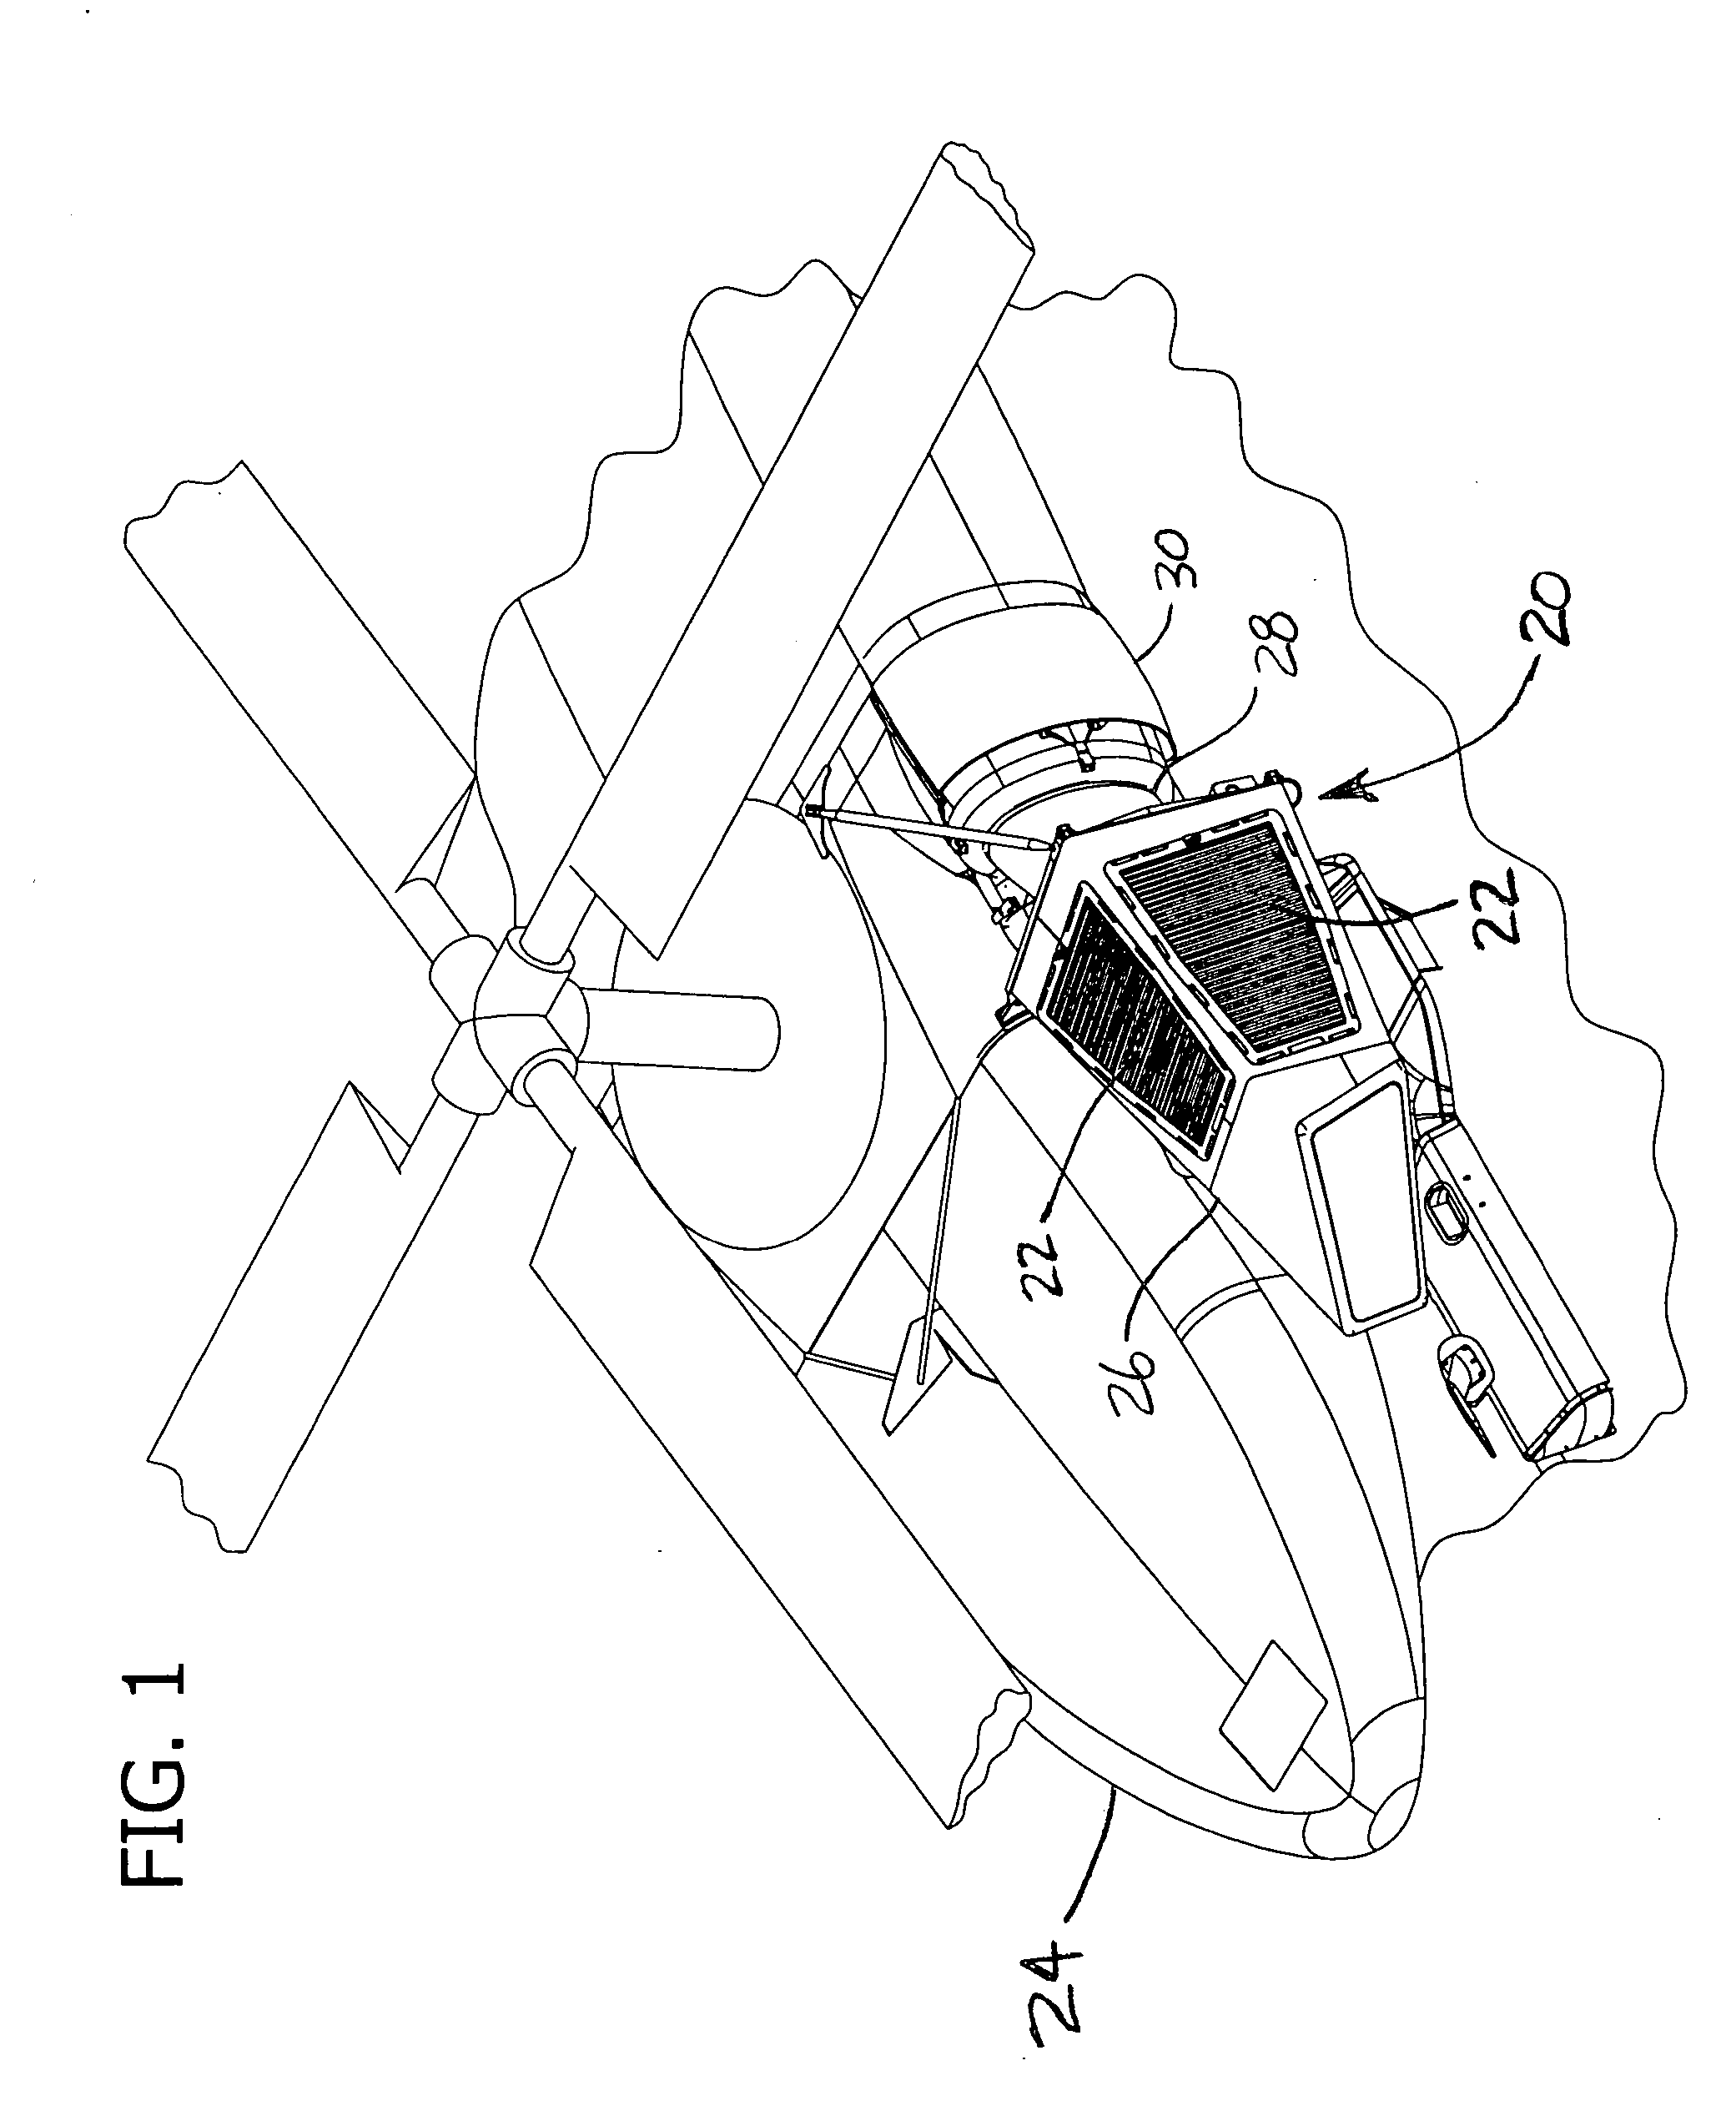 Engine air filter and sealing system